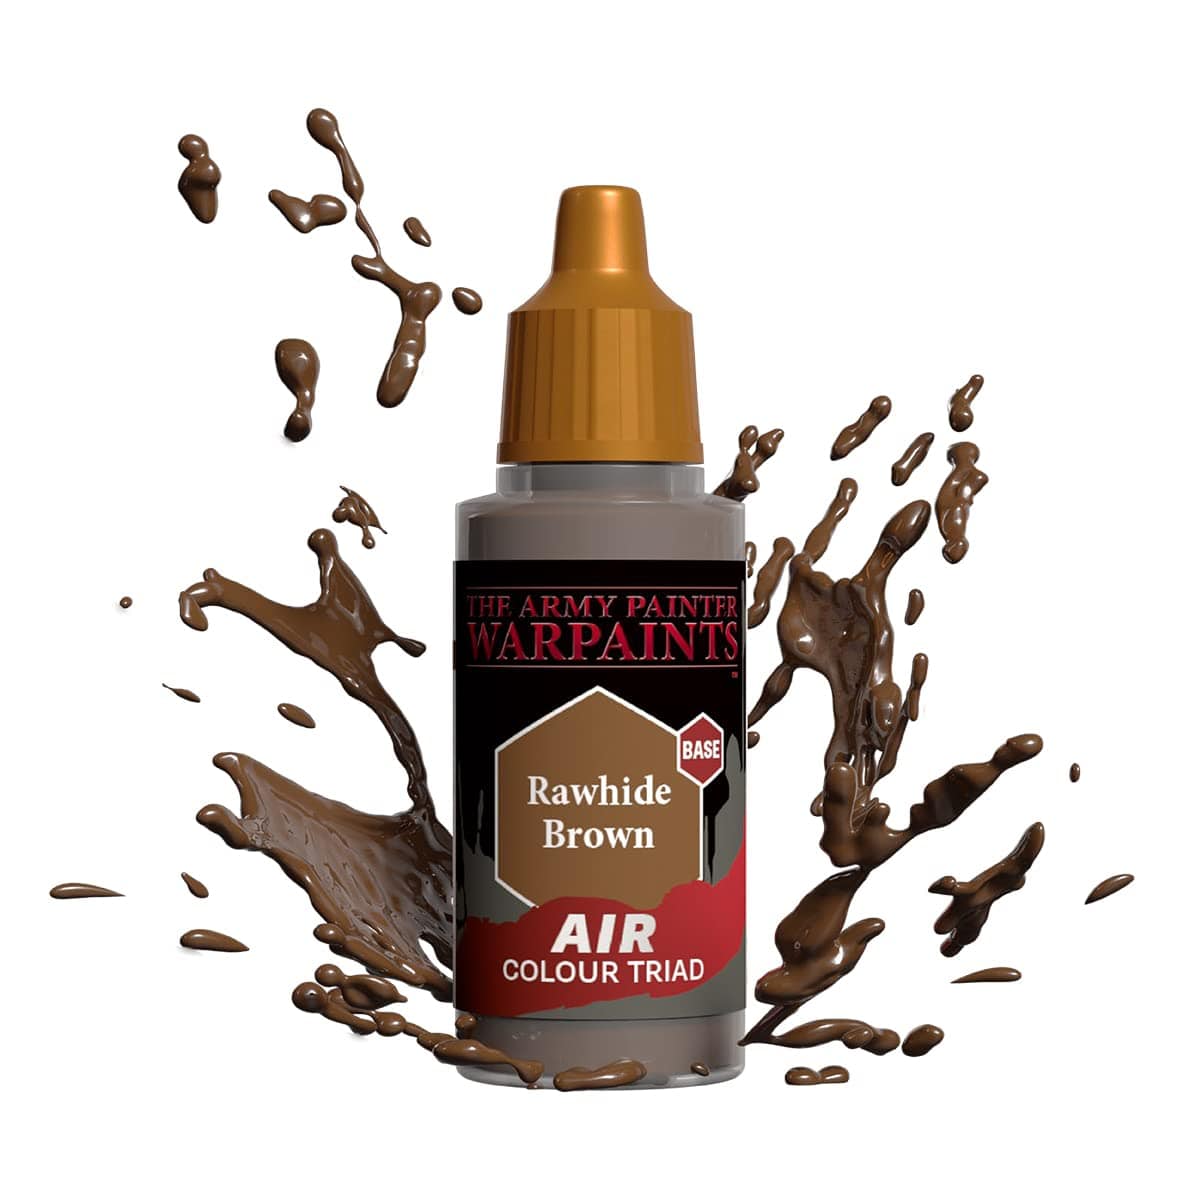 The Army Painter Accessories The Army Painter Warpaints Air: Rawhide Brown 18ml